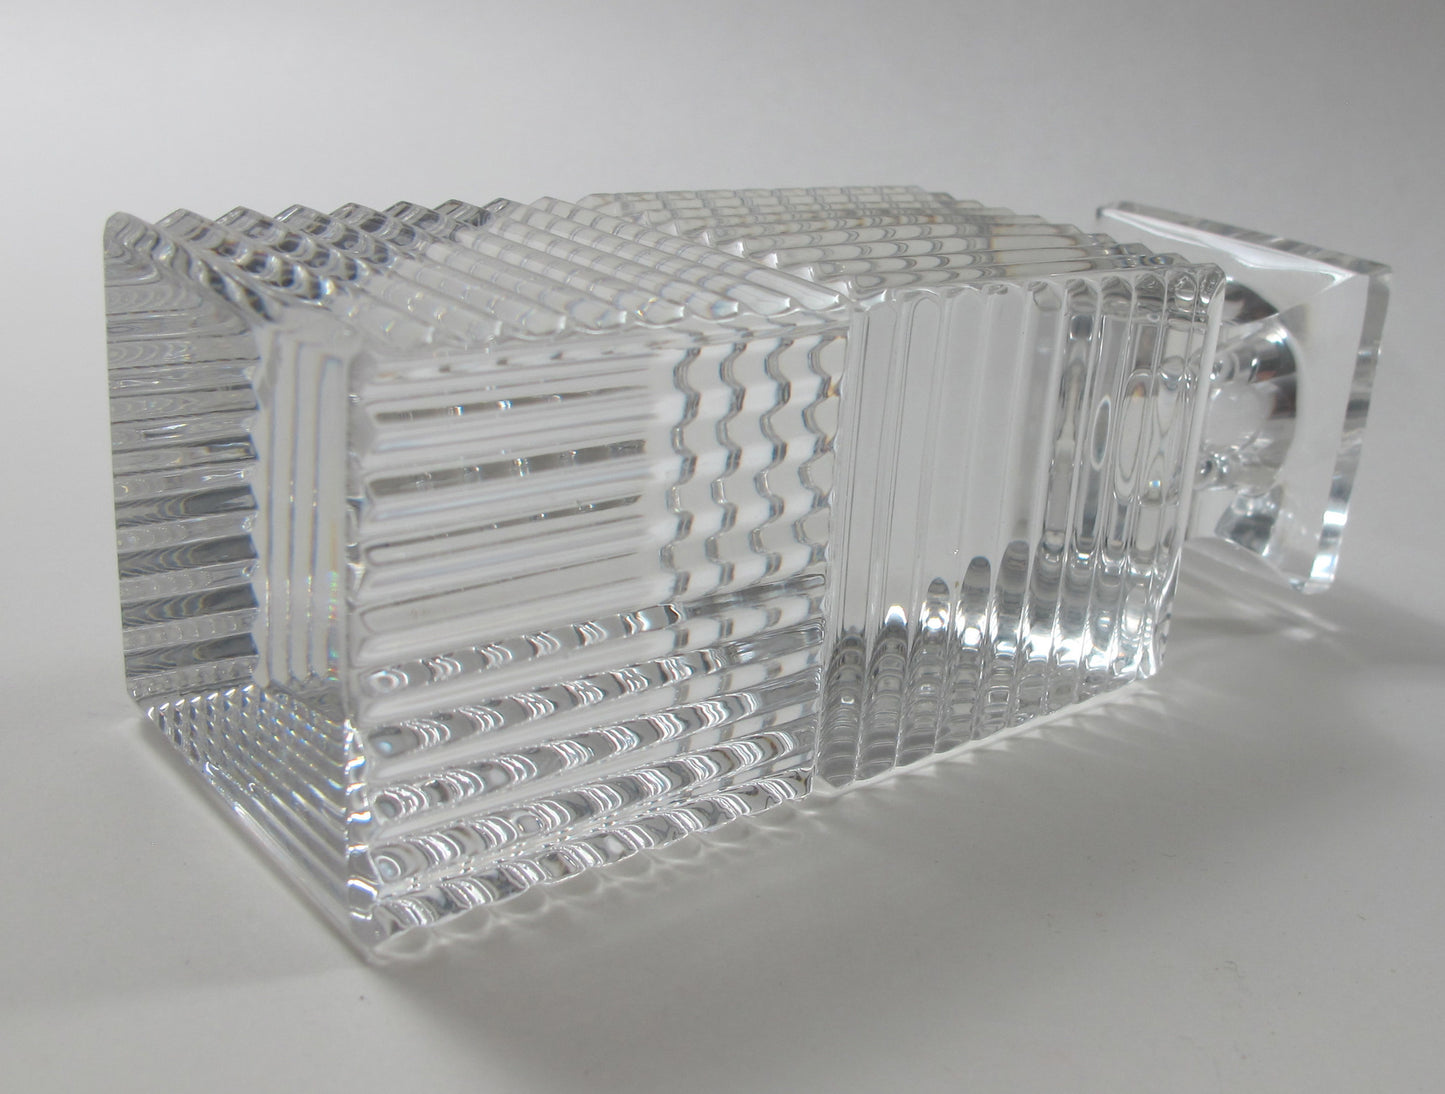 Signed Val st lambert candle holder CRYSTAL 5.375" - O'Rourke crystal awards & gifts abp cut glass